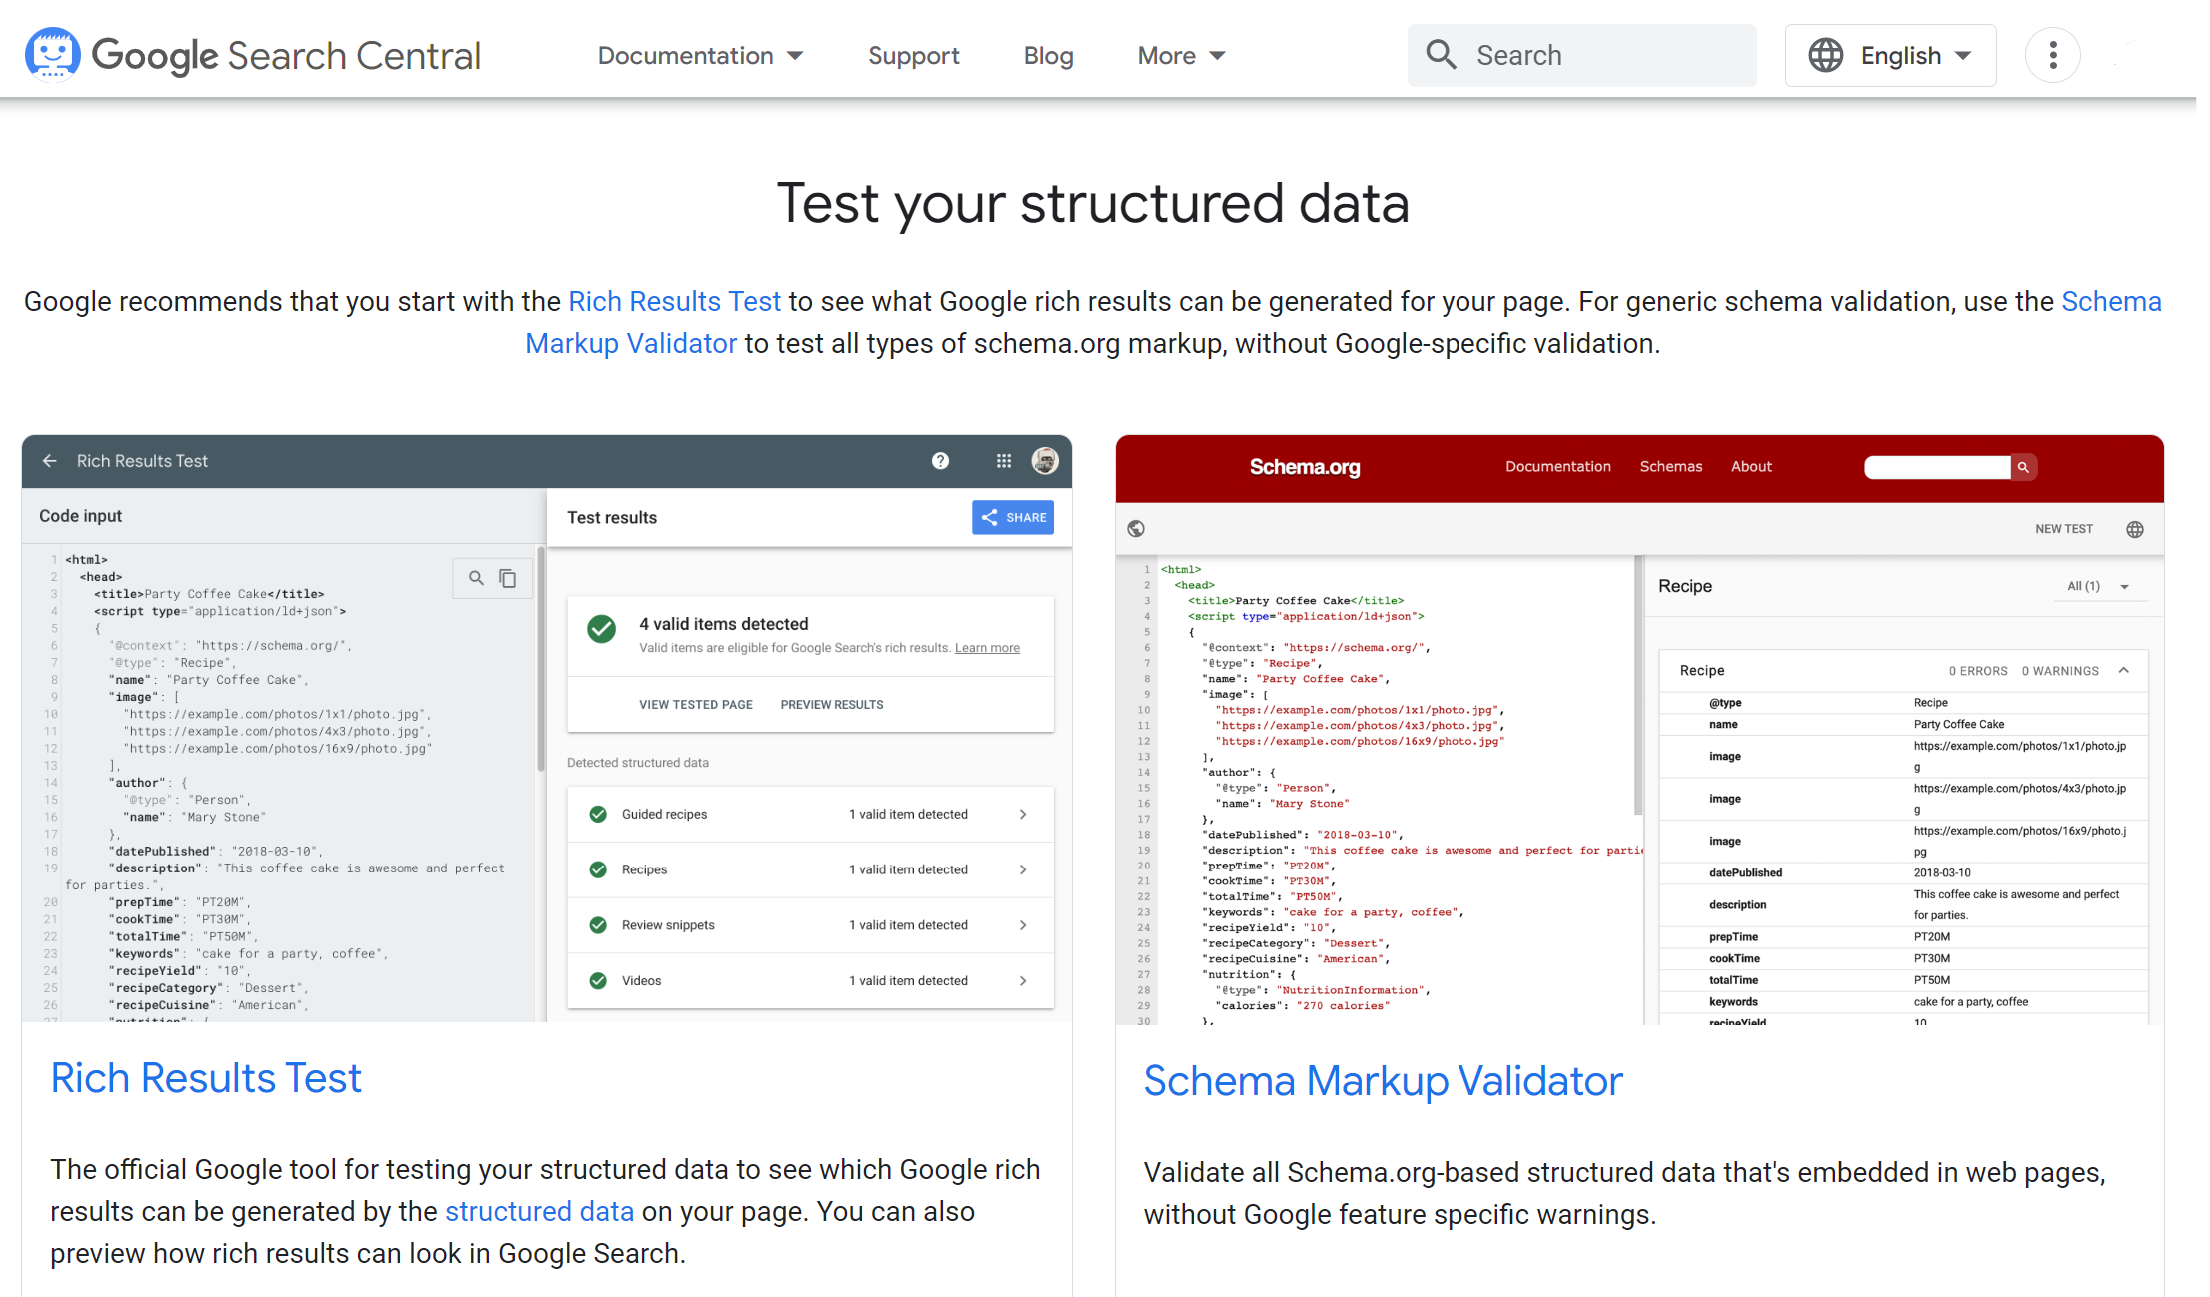 Structured Data Testing Tools